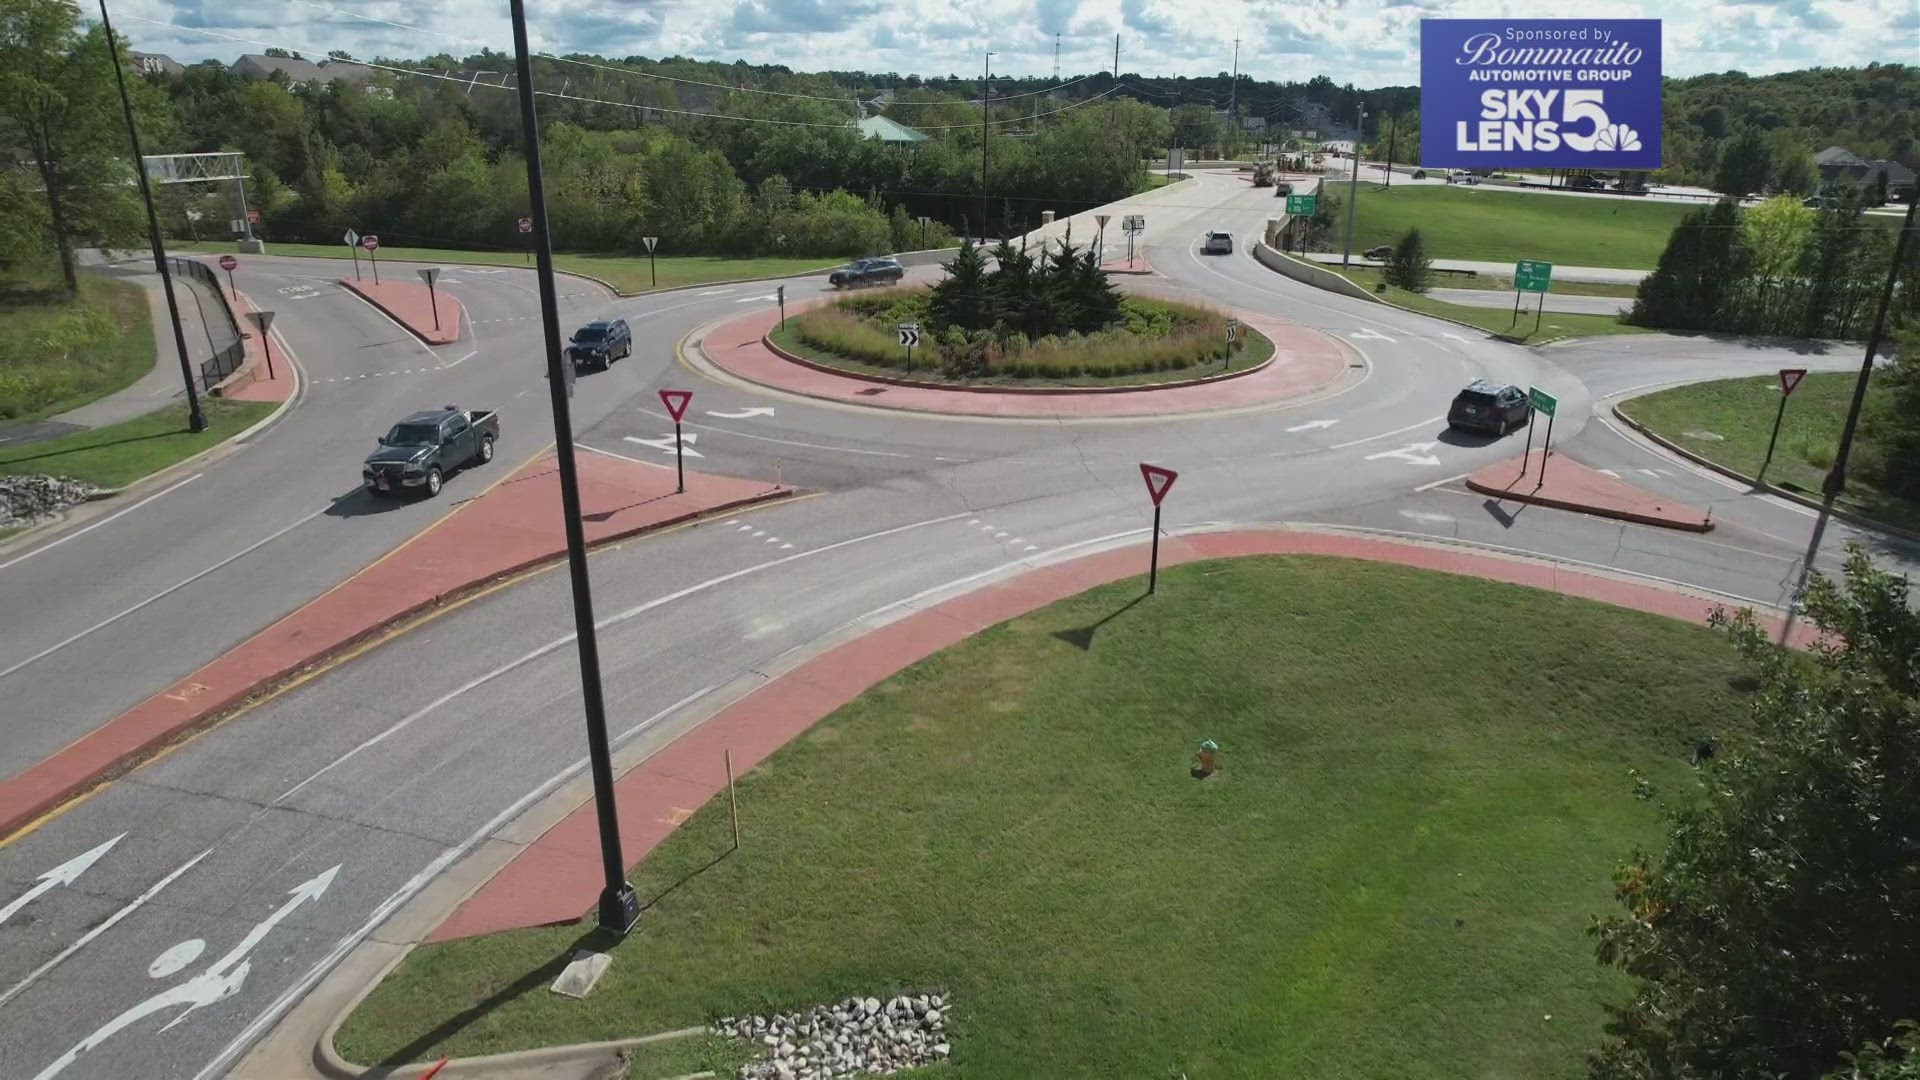 The Insurance Institute for Highway Safety says roundabouts reduce crashes by 39% and serious crashes with injuries by 90%. They also cut traffic jams by 75%.